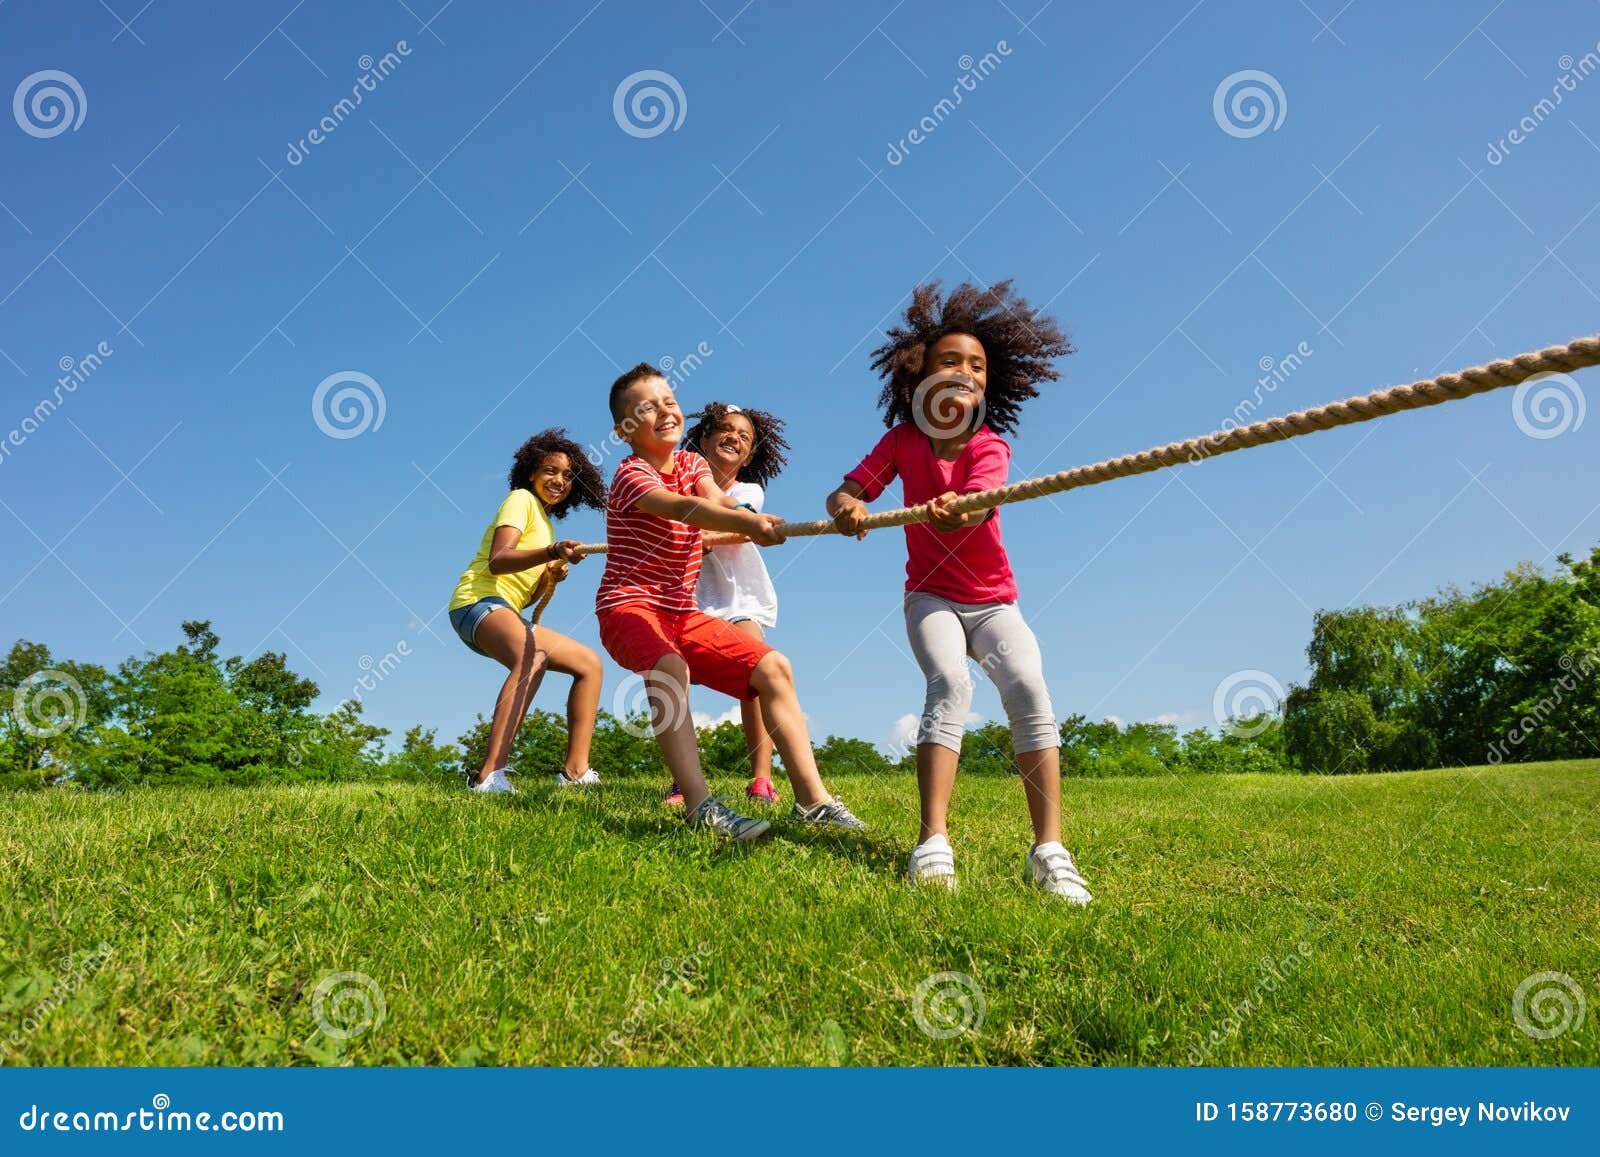 Kids Pull Rope - a Competitive Fun Game in Park Stock Photo - Image of  kids, friends: 158773680